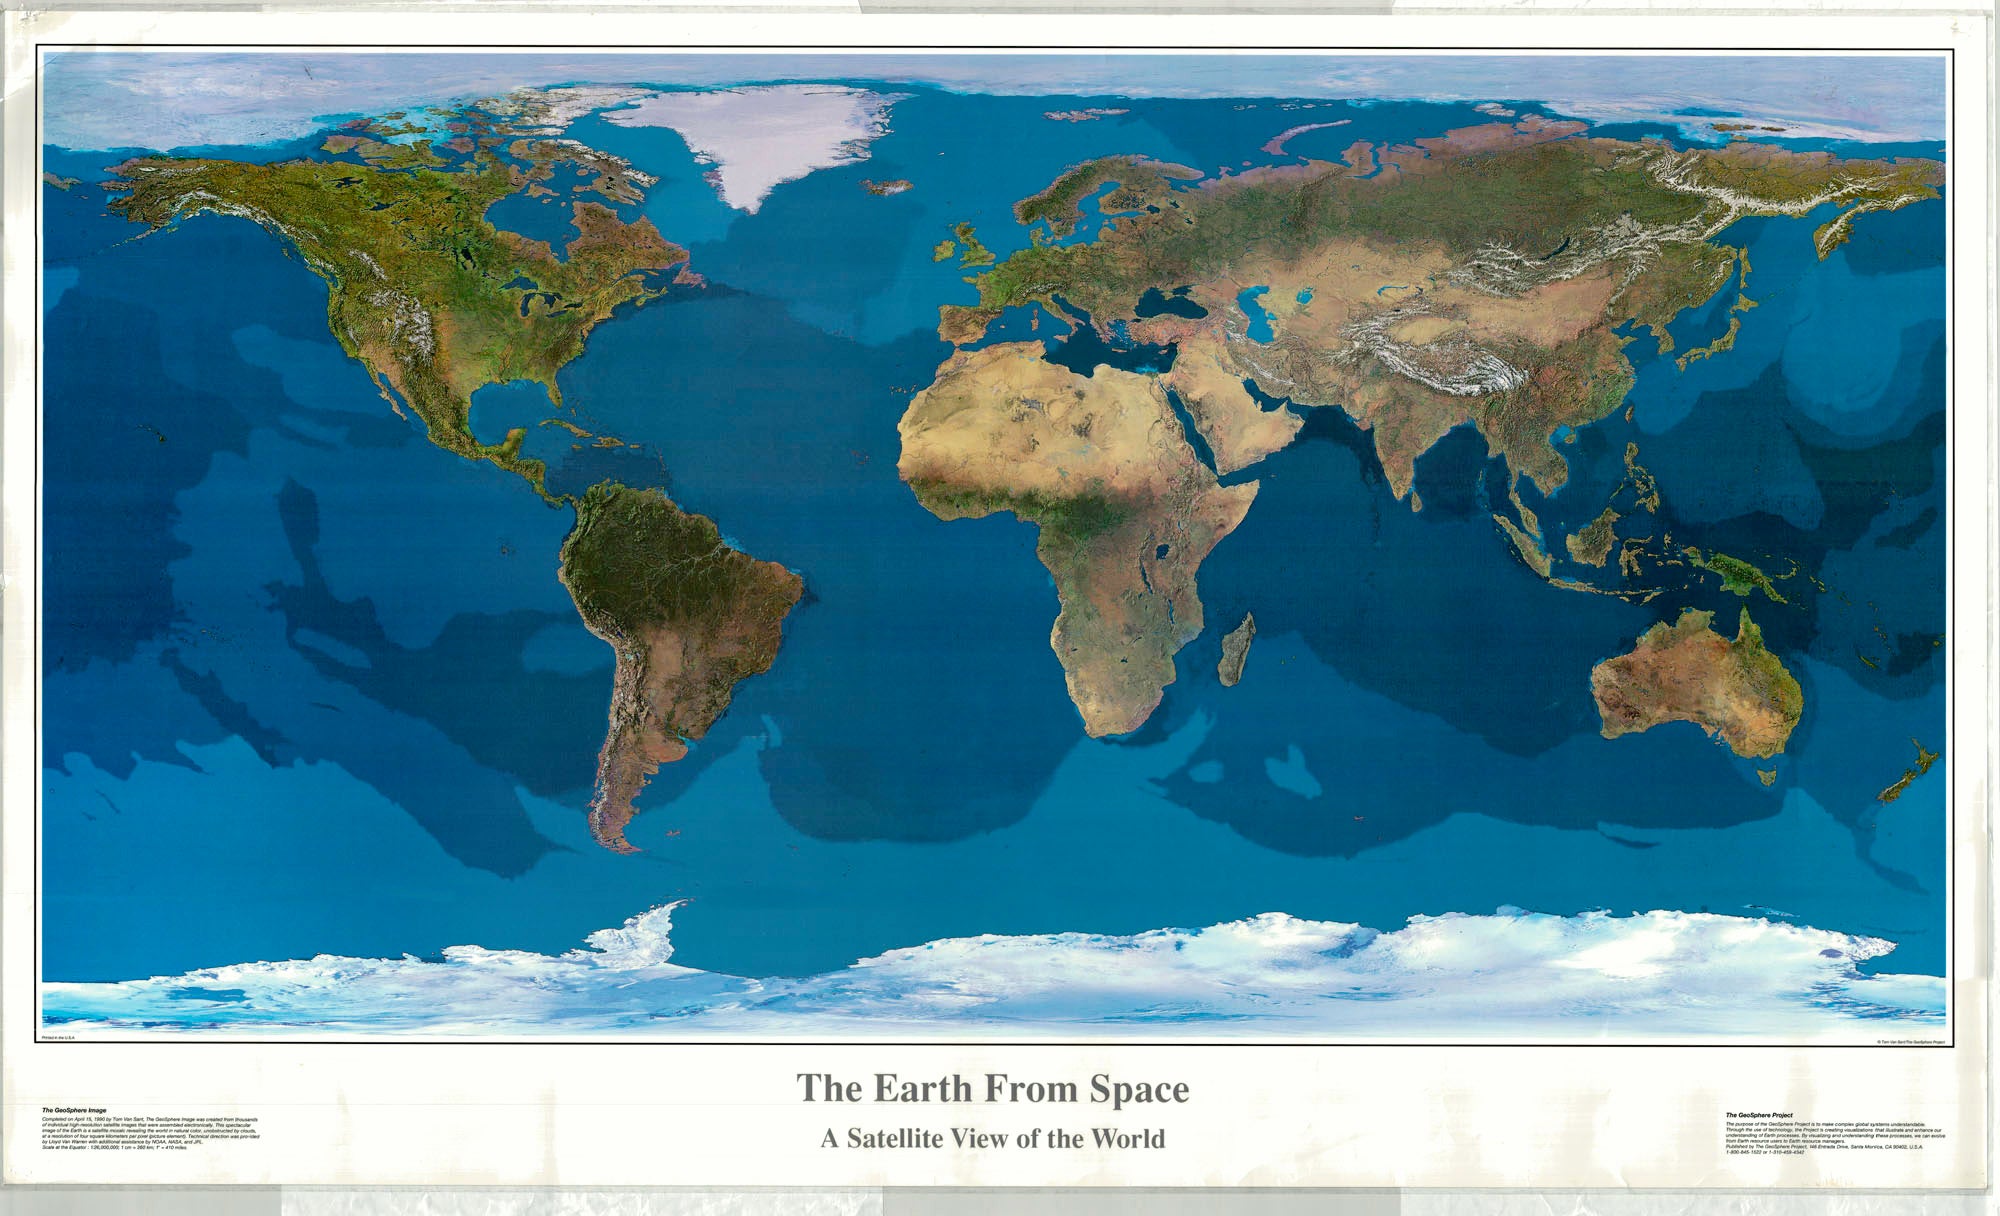 (World) The Earth From Space